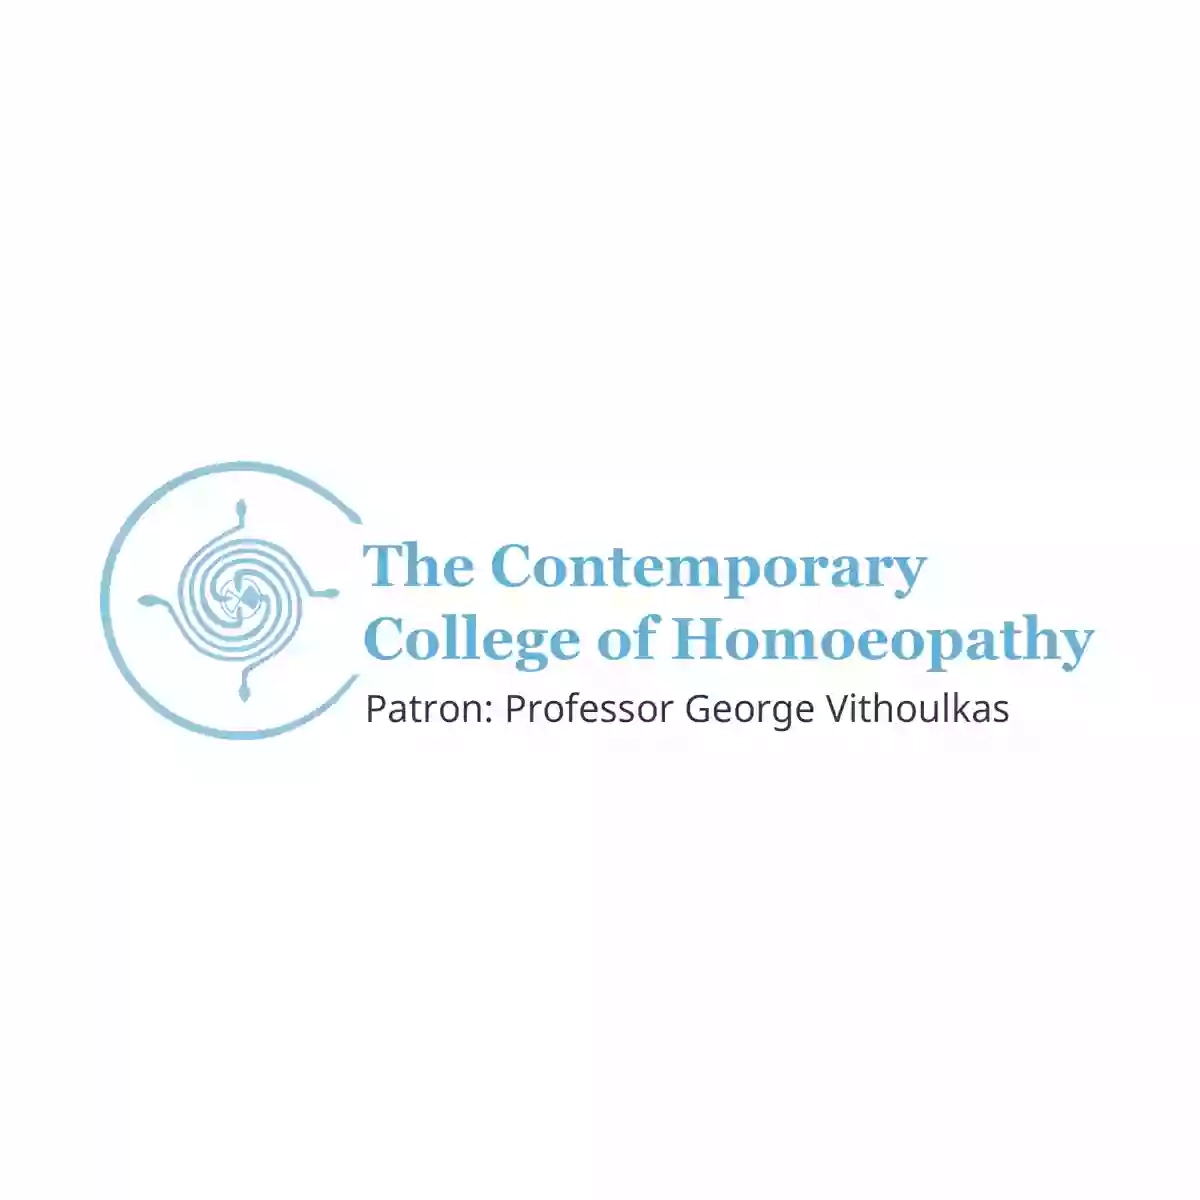 The Contemporary College of Homoeopathy